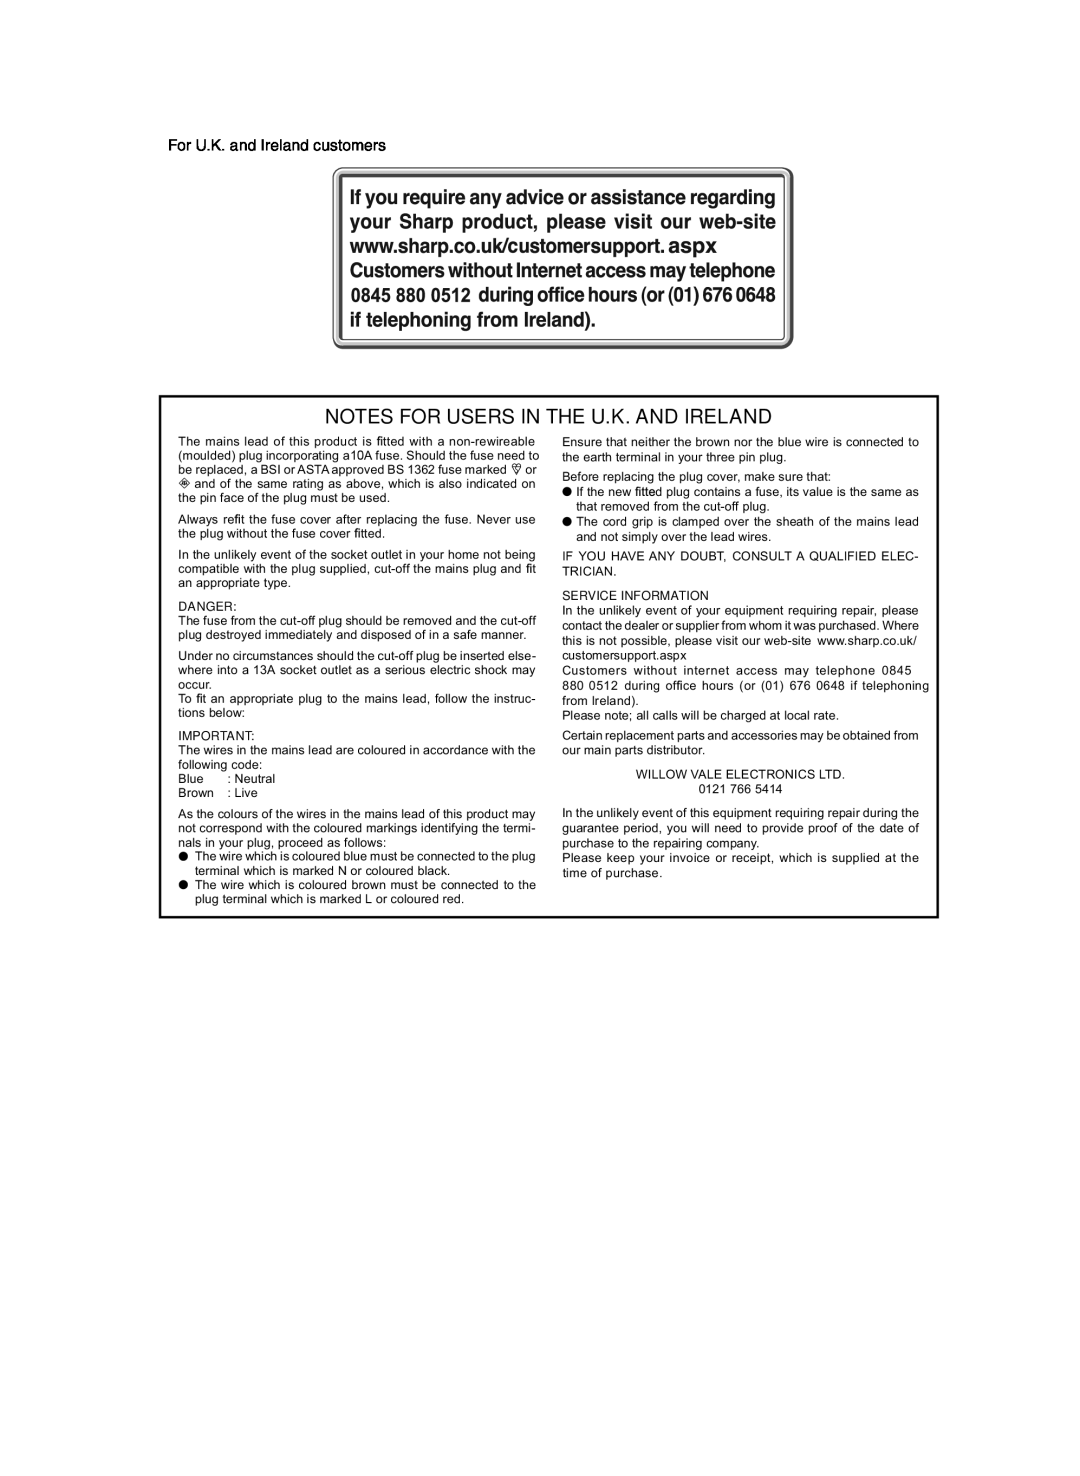 Sharp GX-M10H(OR), GX-M10H(RD) operation manual Notes For Users In The U.K. And Ireland, For U.K. and Ireland customers 